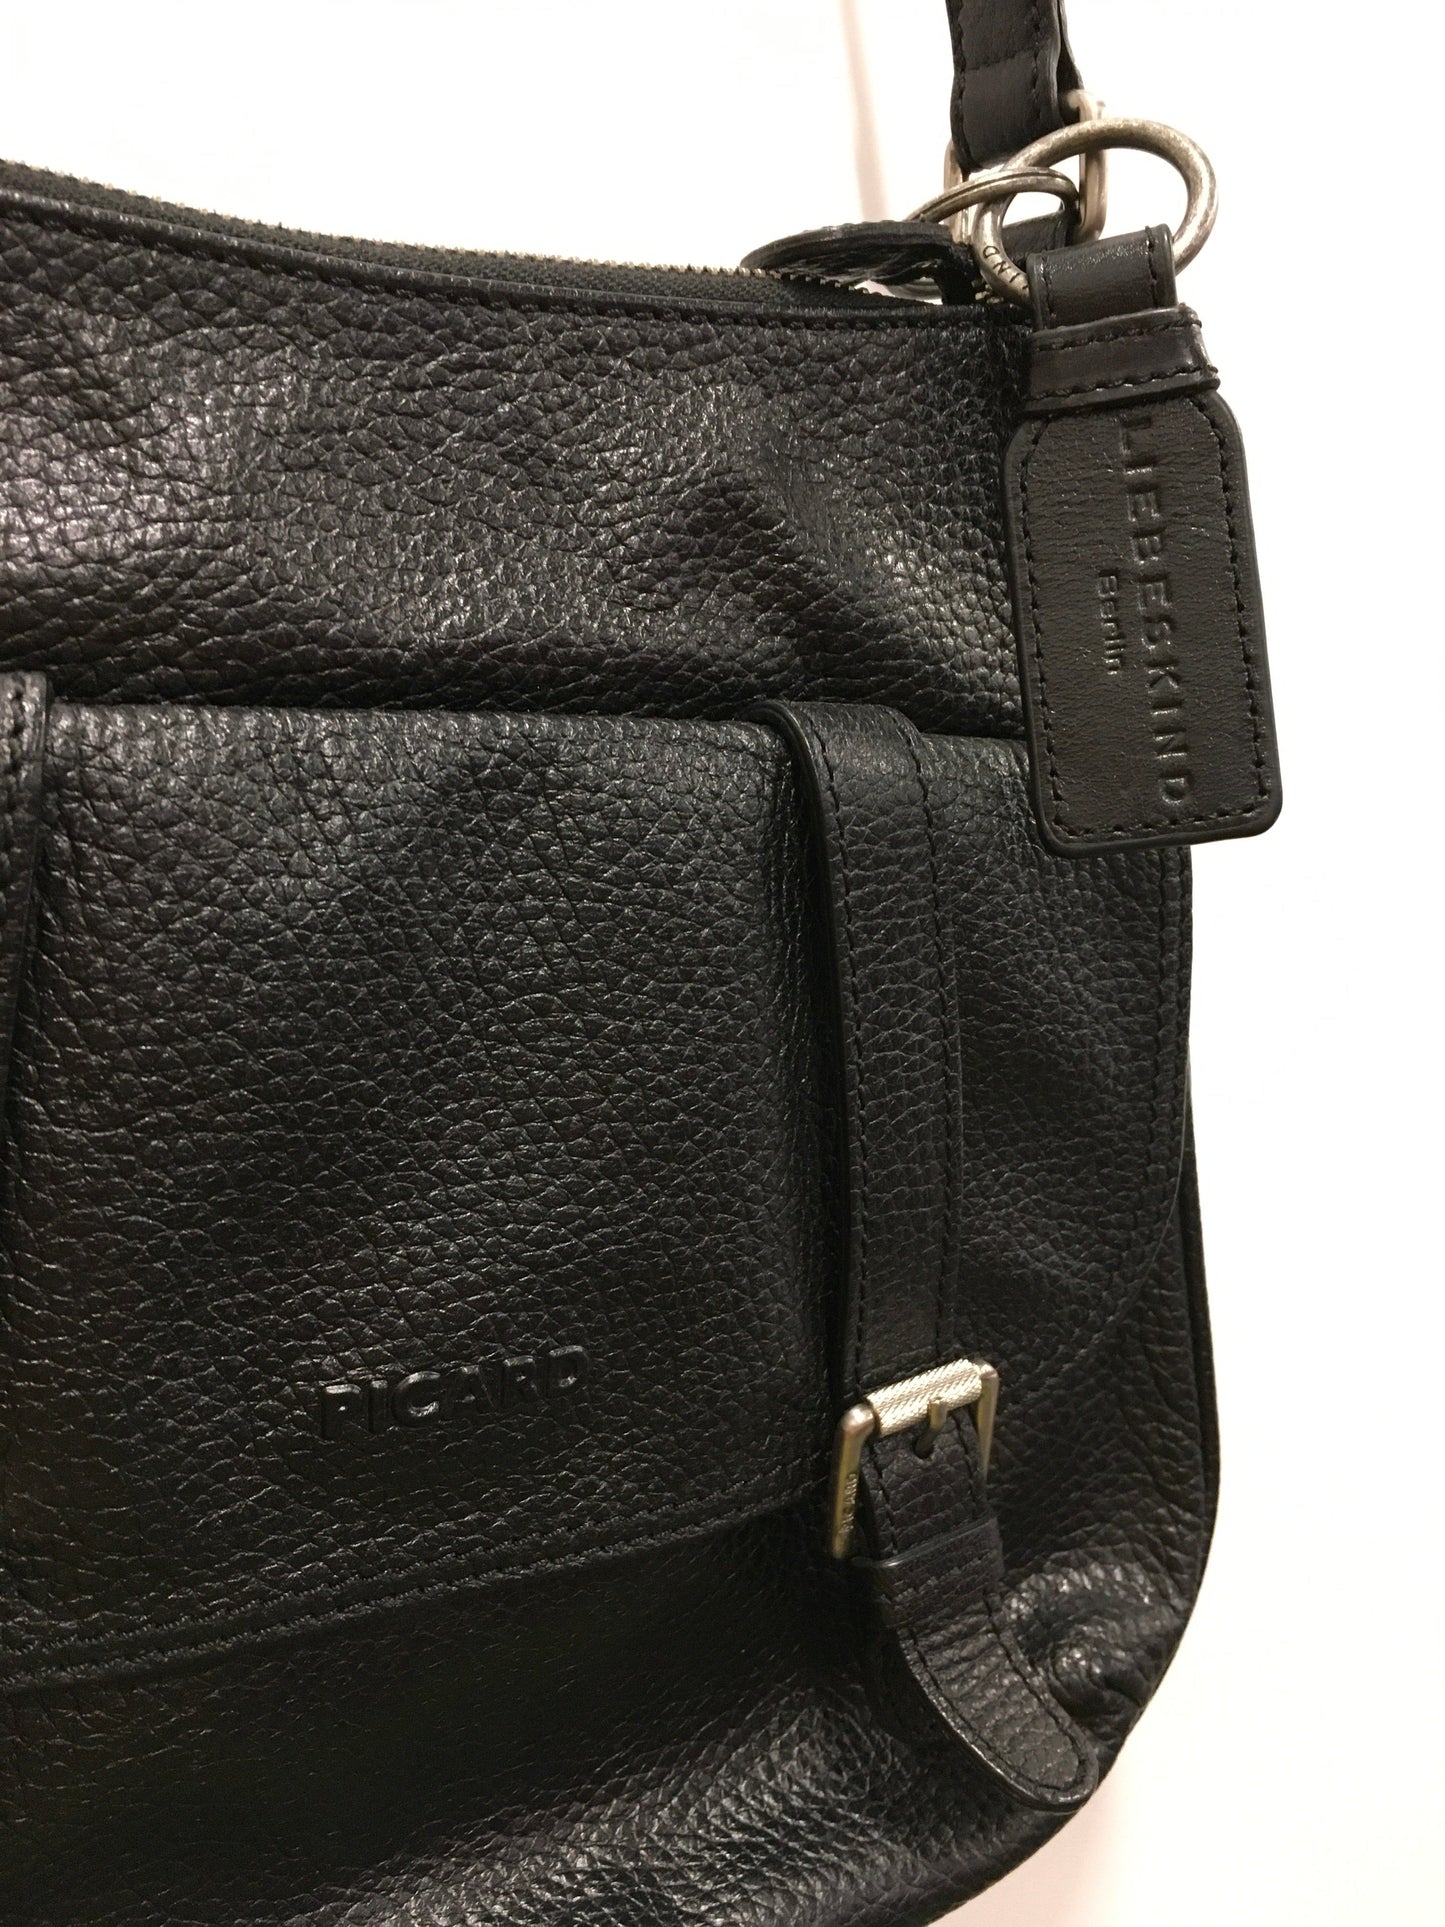 Crossbody Leather By Picard  Size: Medium